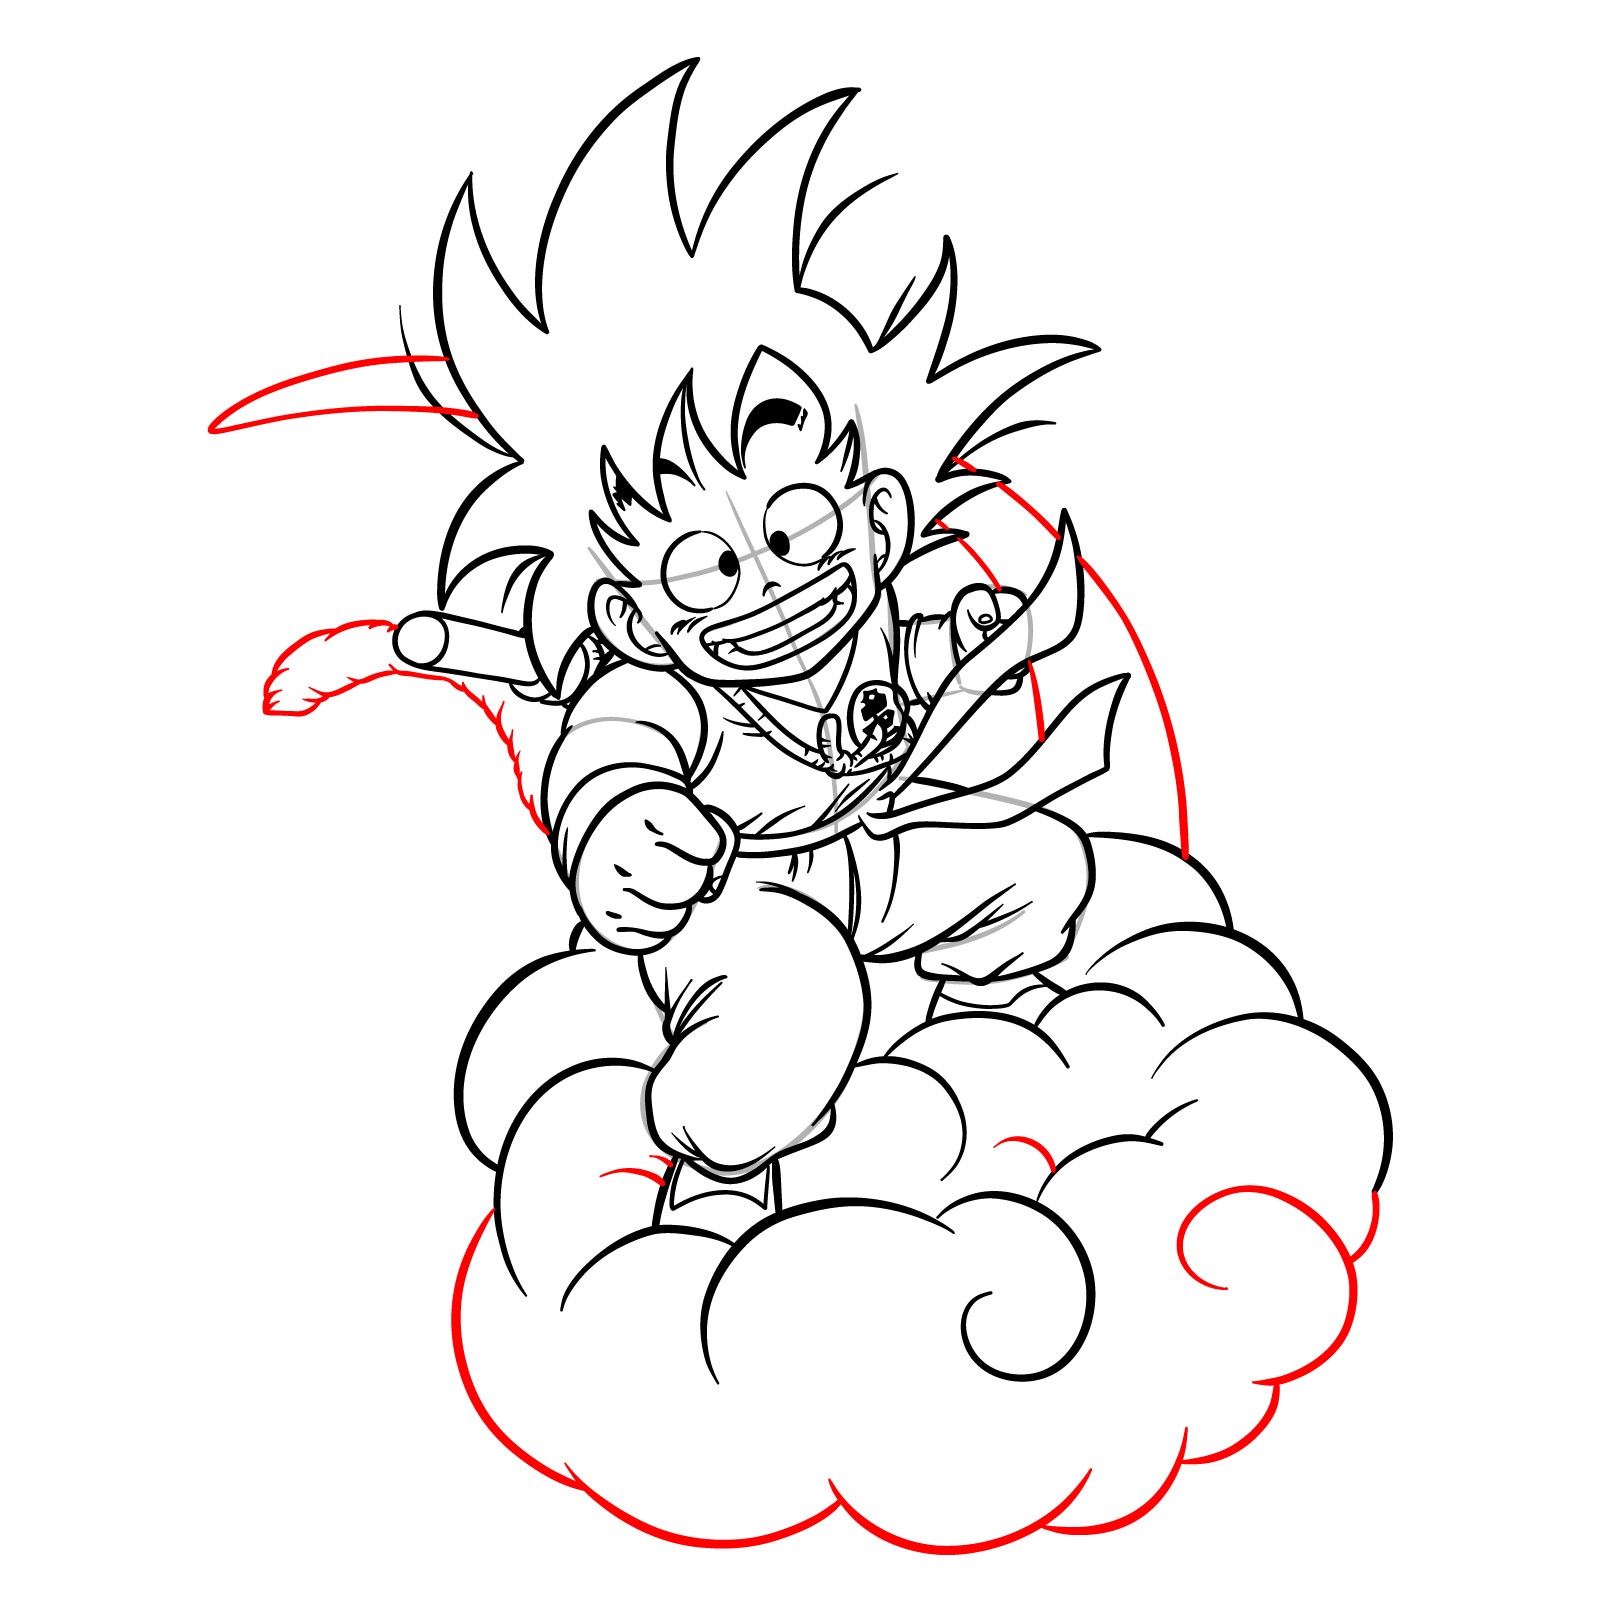 How to draw Kid Goku riding on the Flying Nimbus - step 27